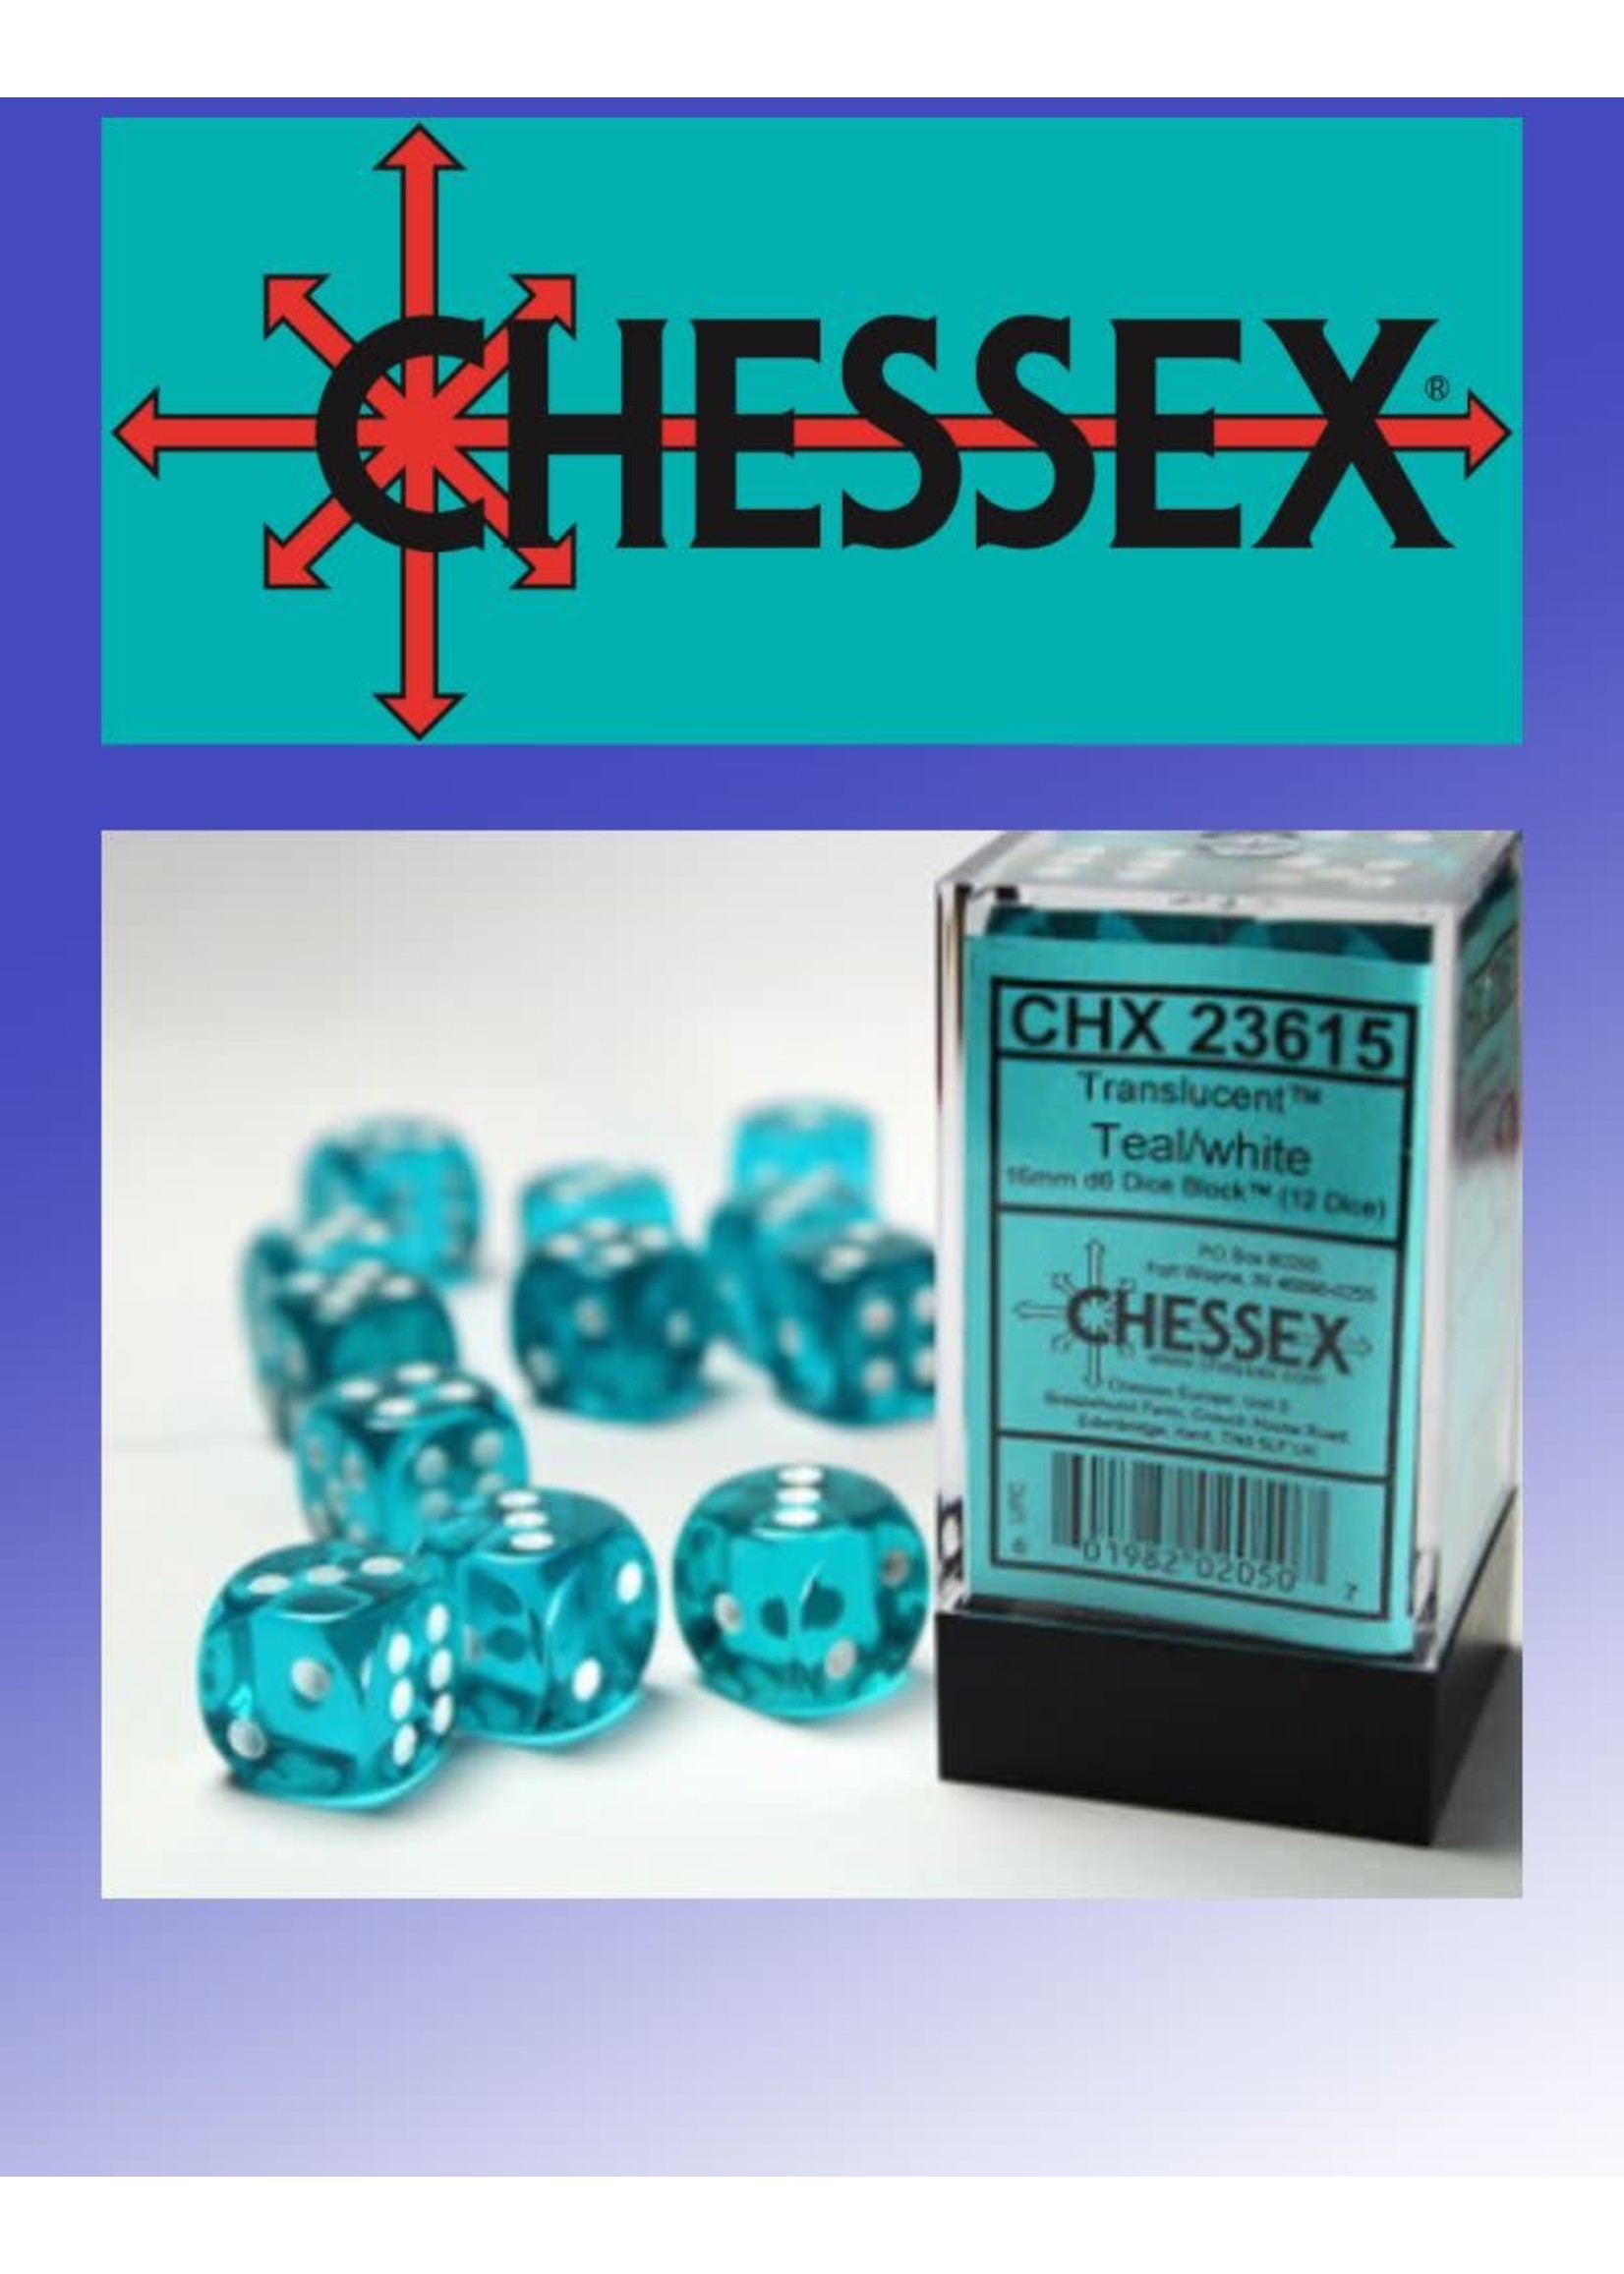 Chessex Chessex: Translucent Teal/White 16mm 12d6